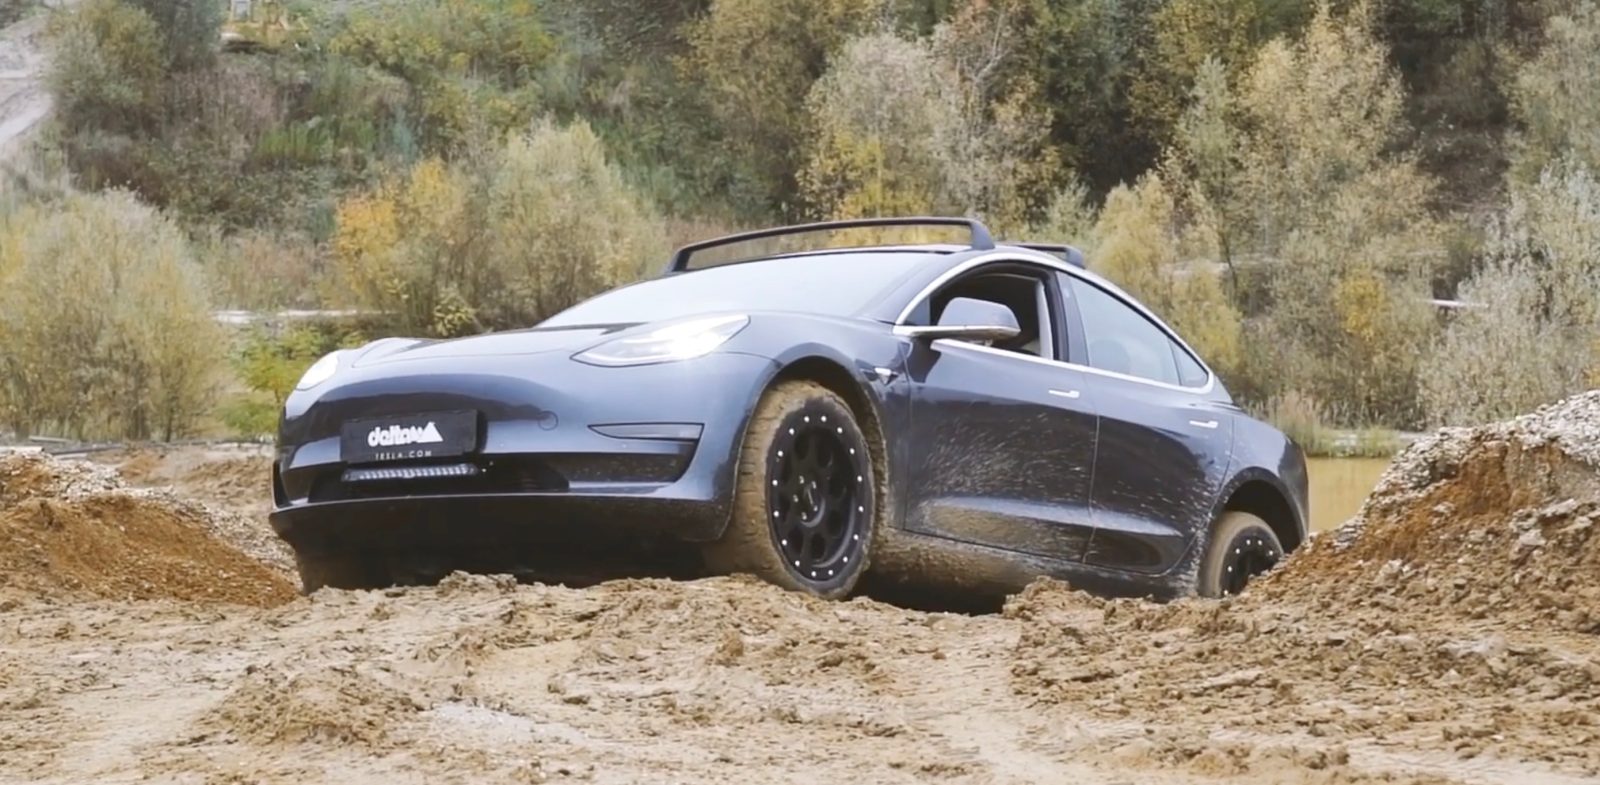 Tesla Model 3 looks like rugged electric off-road machine with new